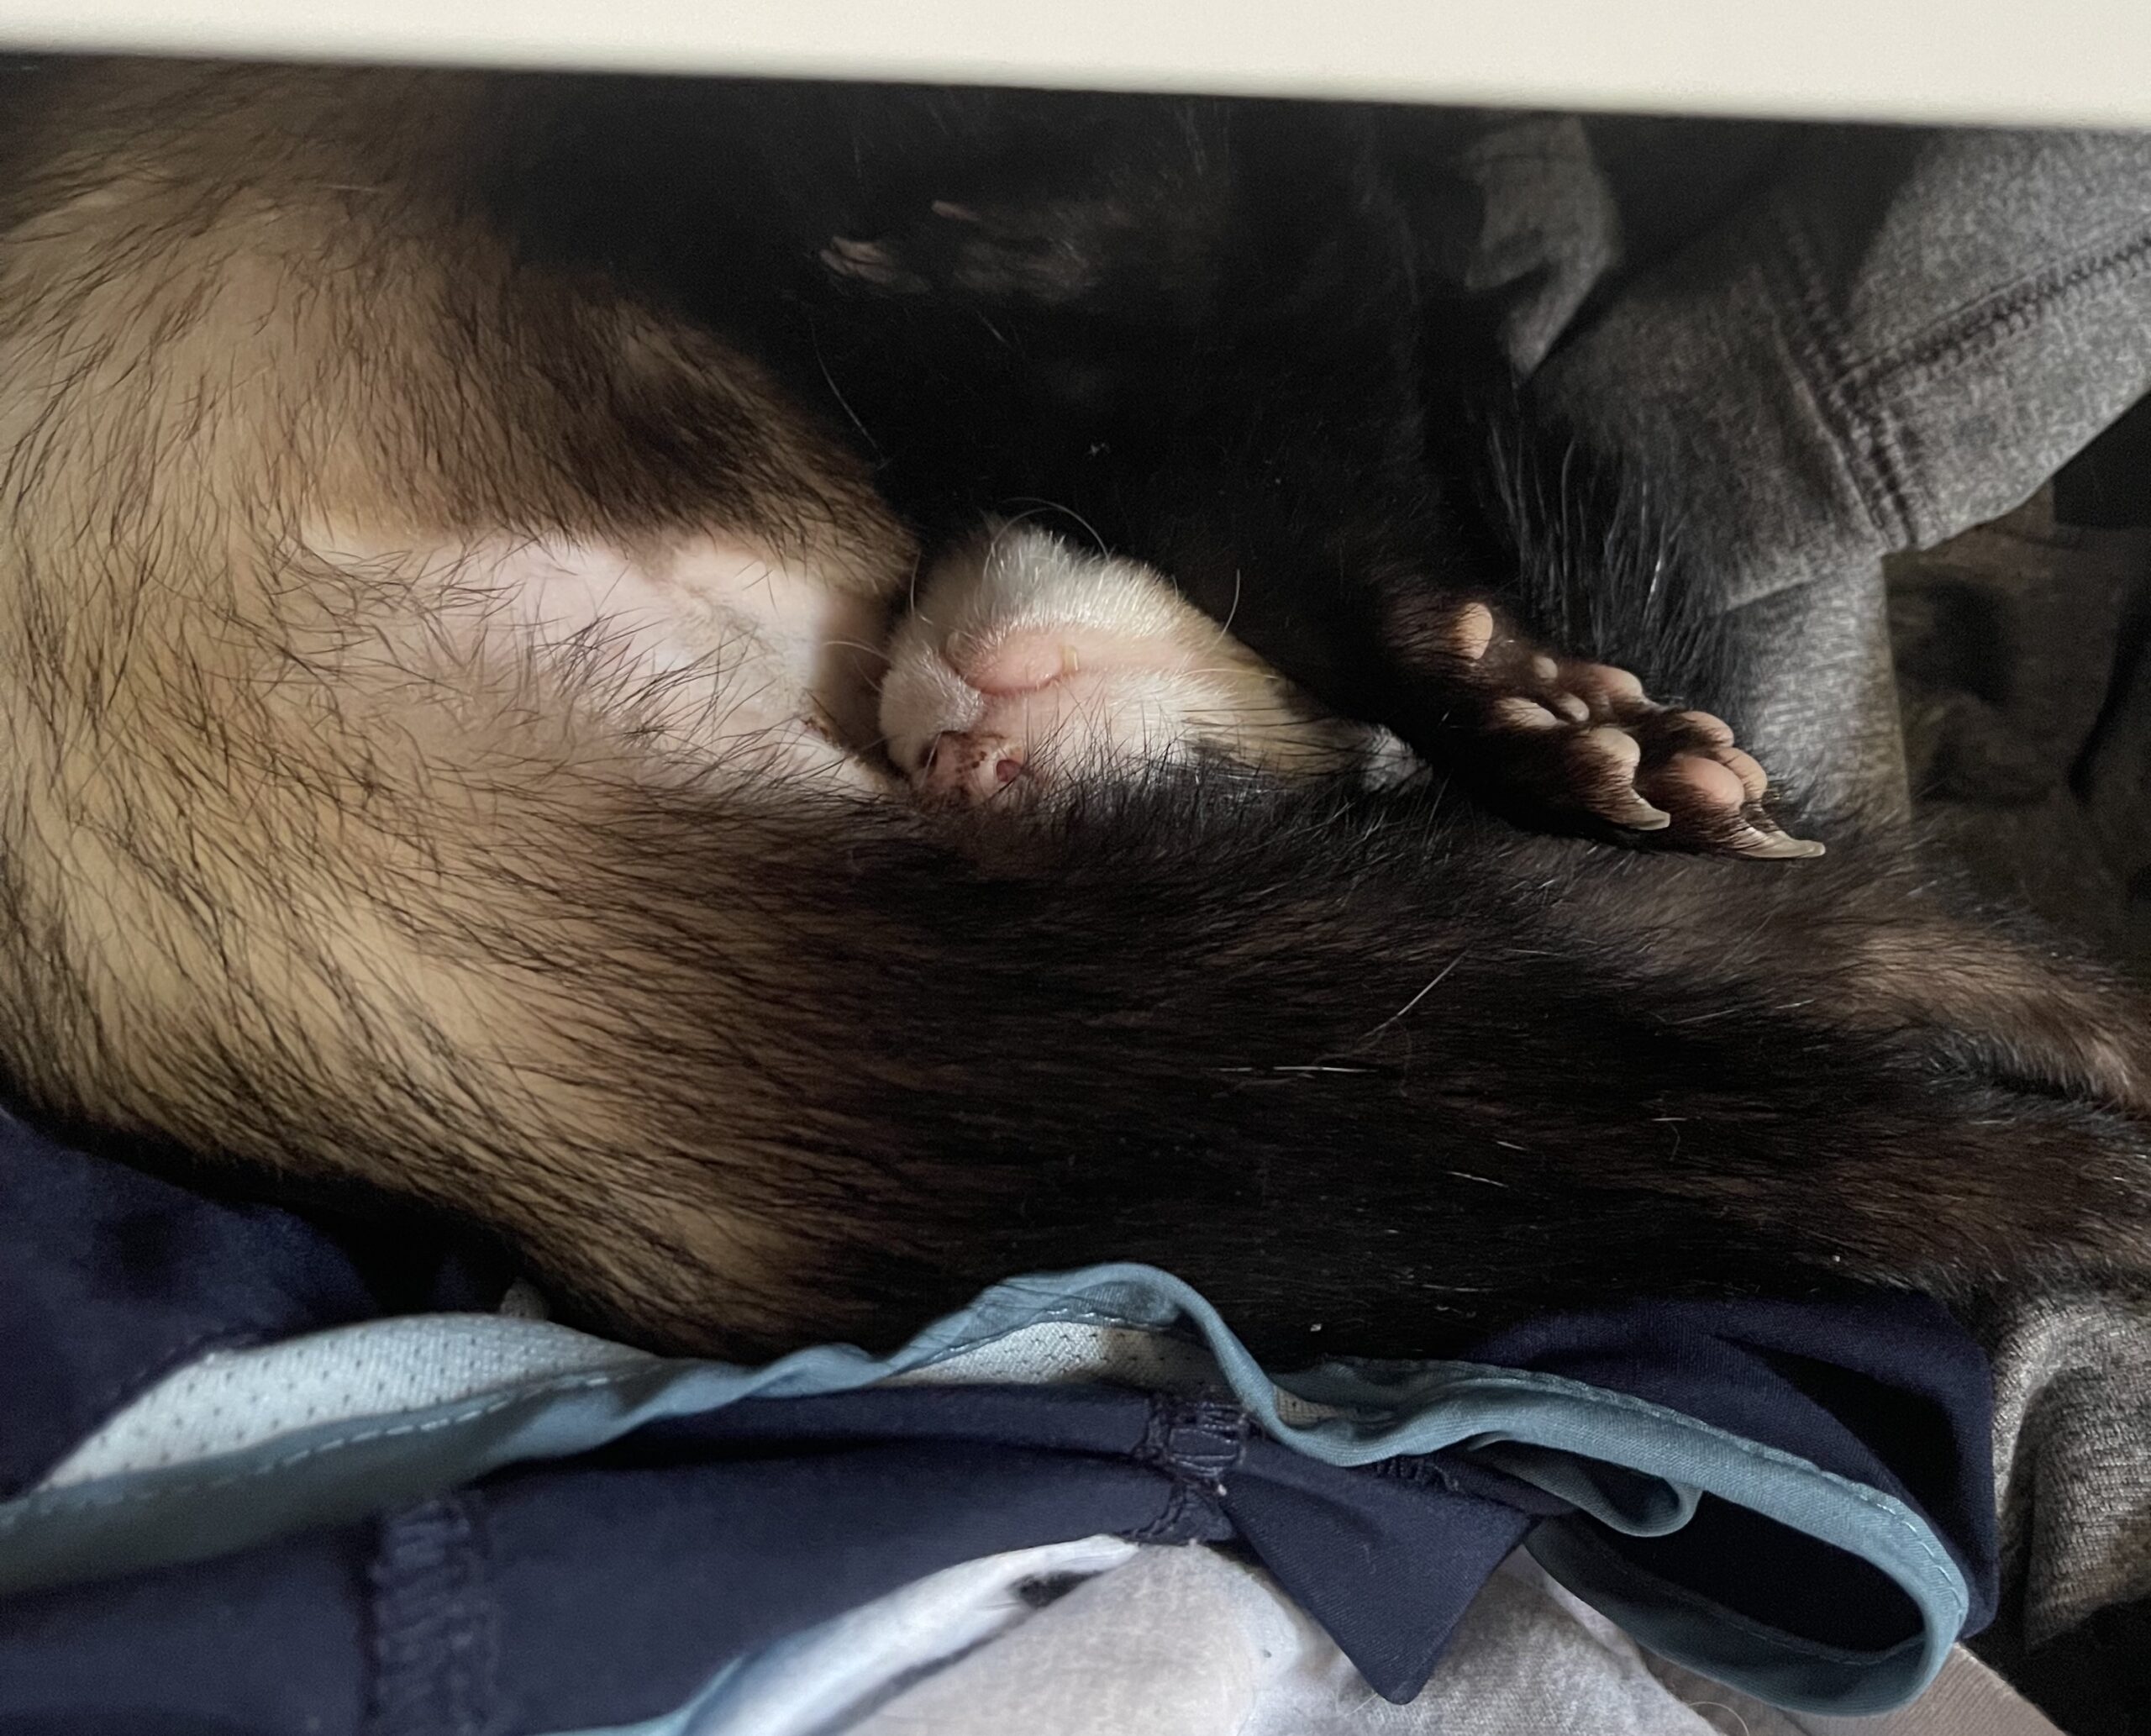 A black and white ferret is curled up and napping in a dresser drawer